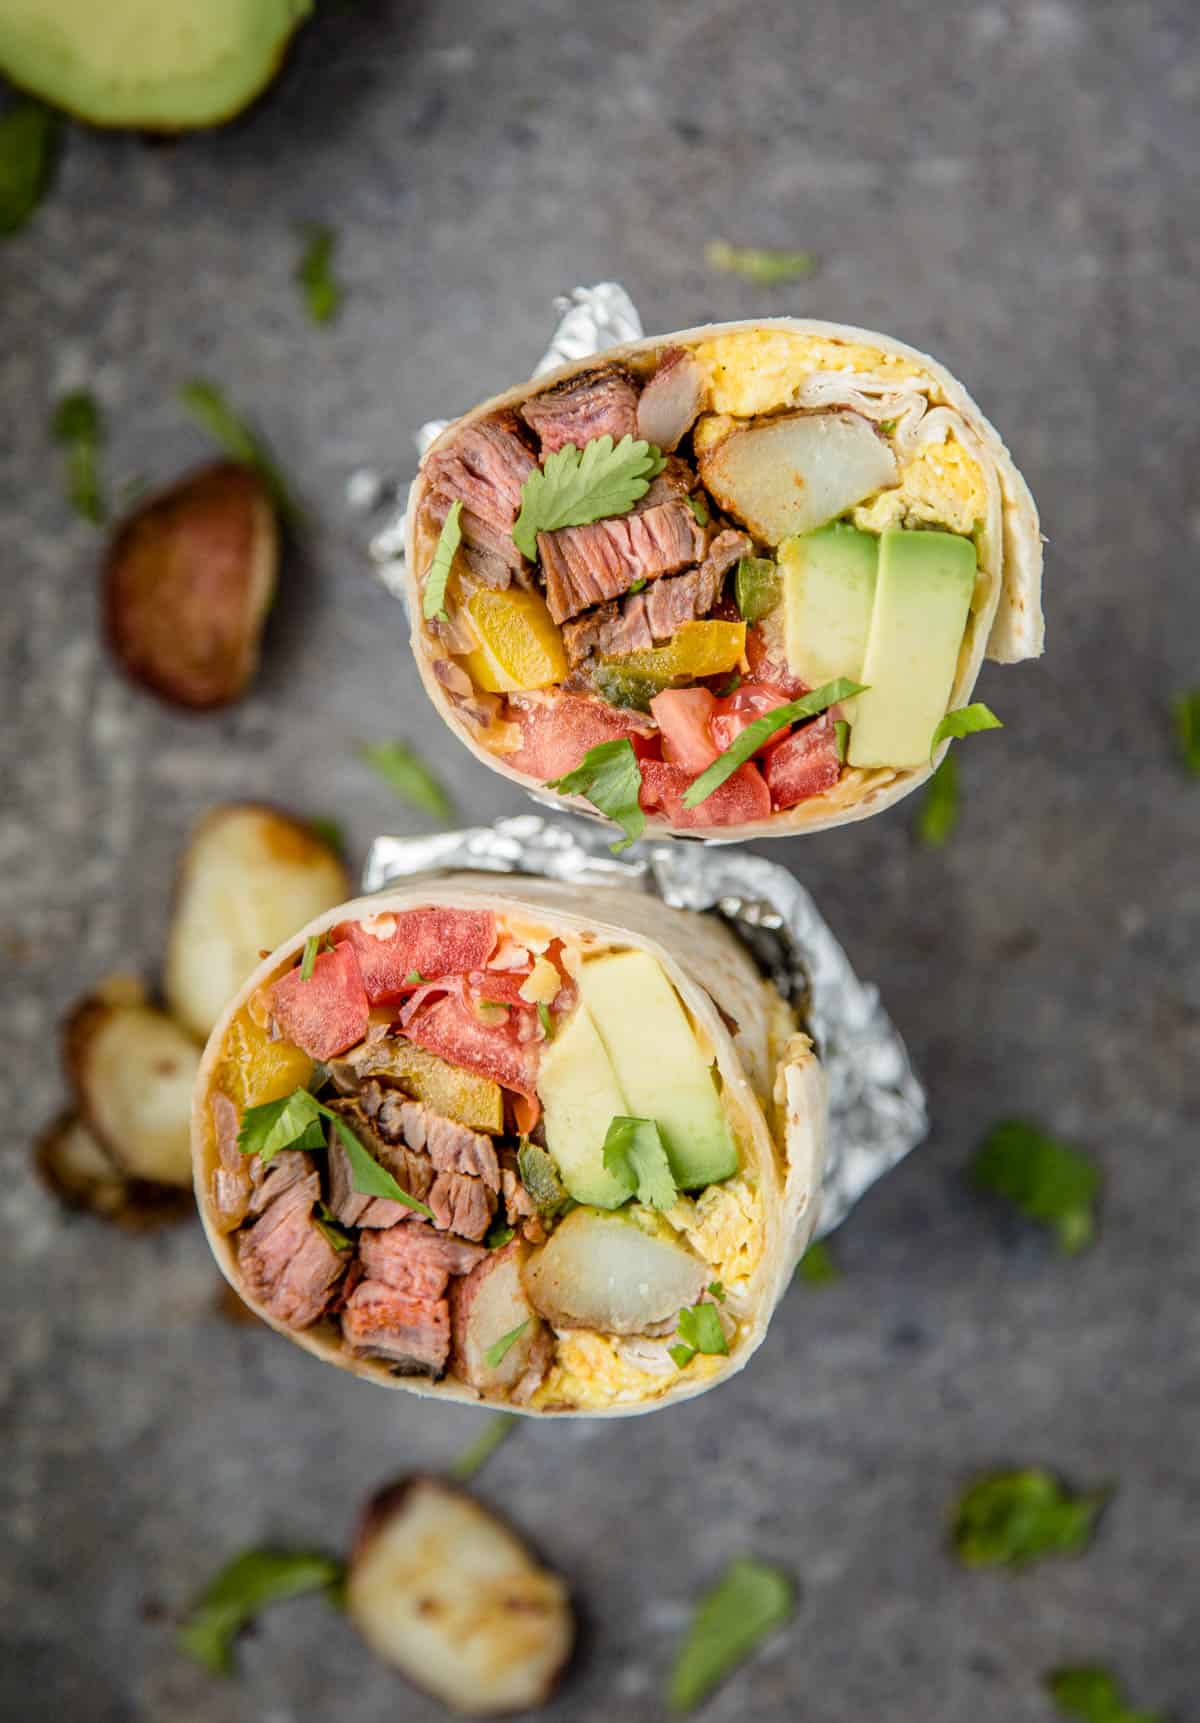 5 breakfast burritos you don't want to miss, and a bonus breakfast